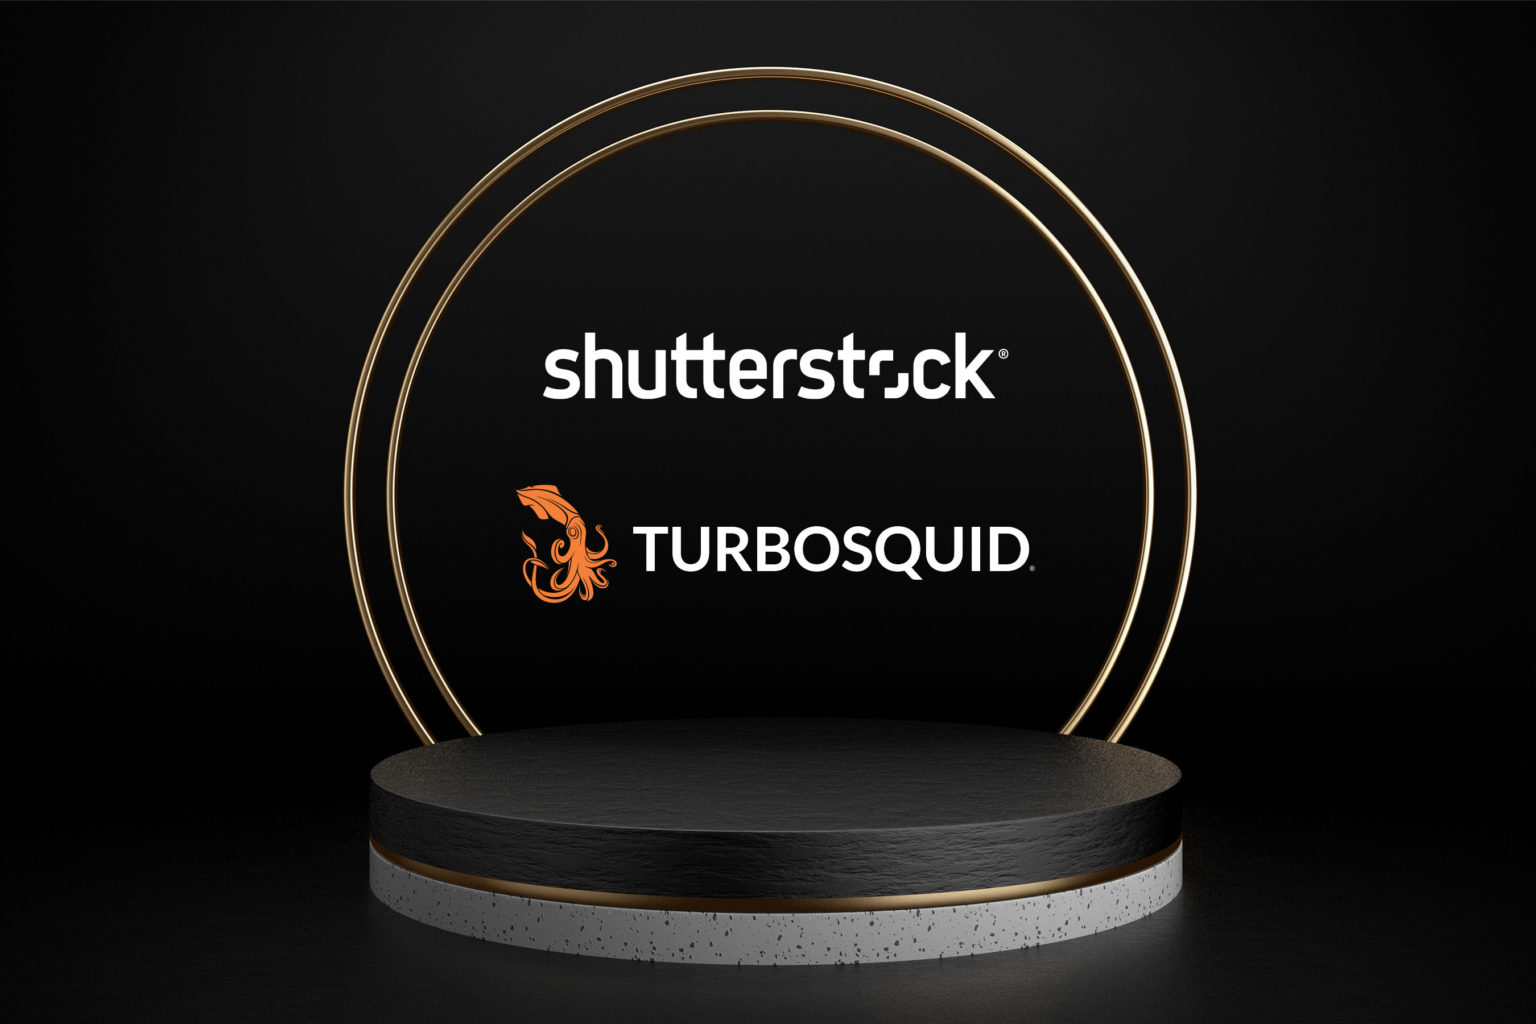 Shutterstock To Acquire Turbosquid The Worlds Largest 3d Marketplace Bapla